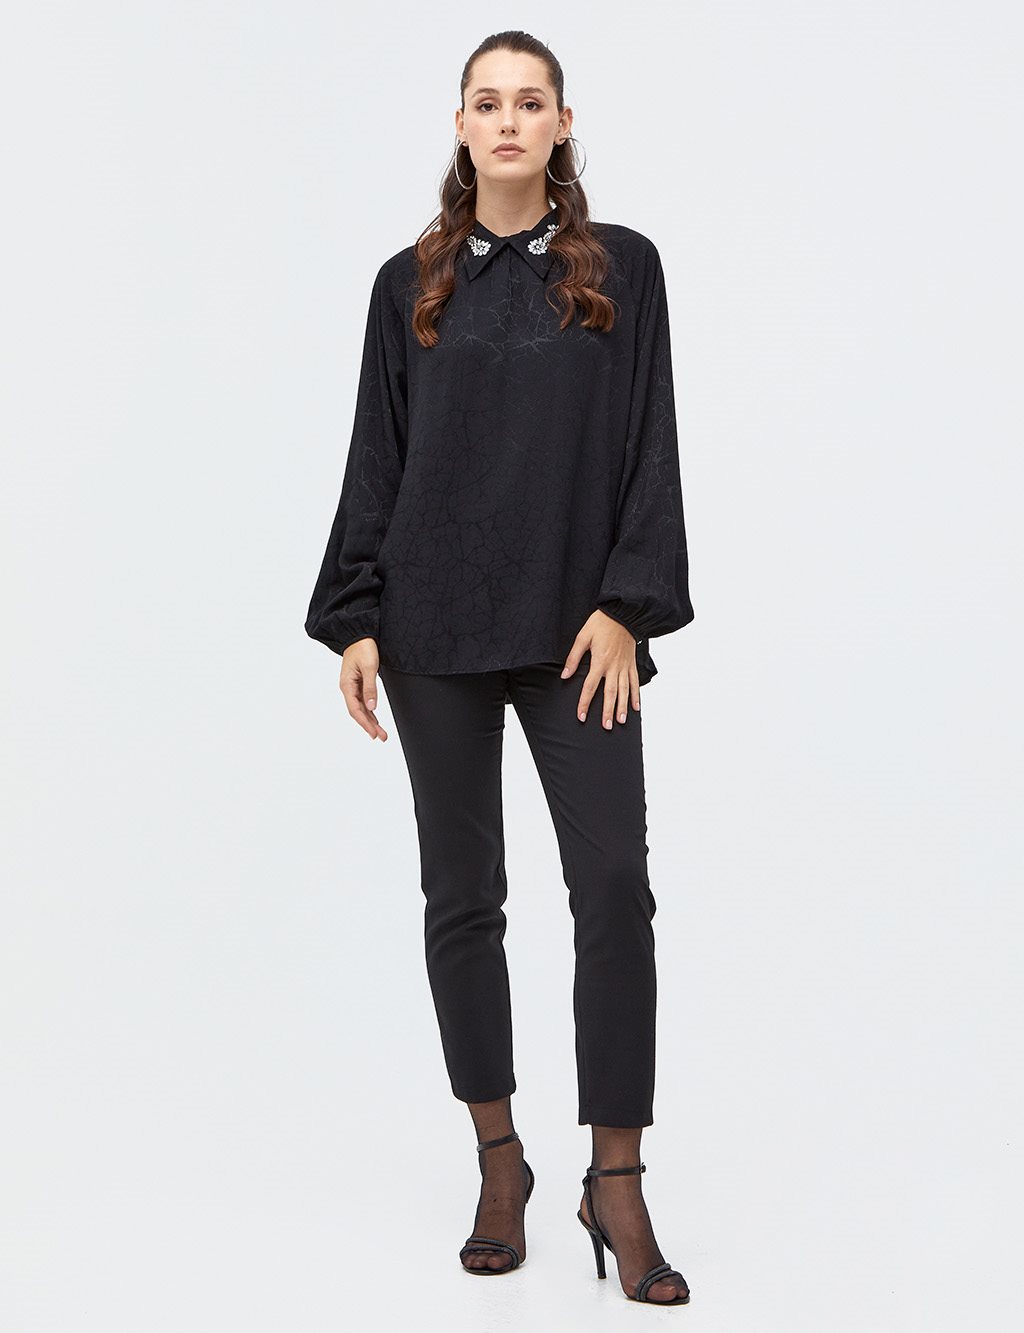 Embroidered Sleeves Round Neck Collar Blouse Black